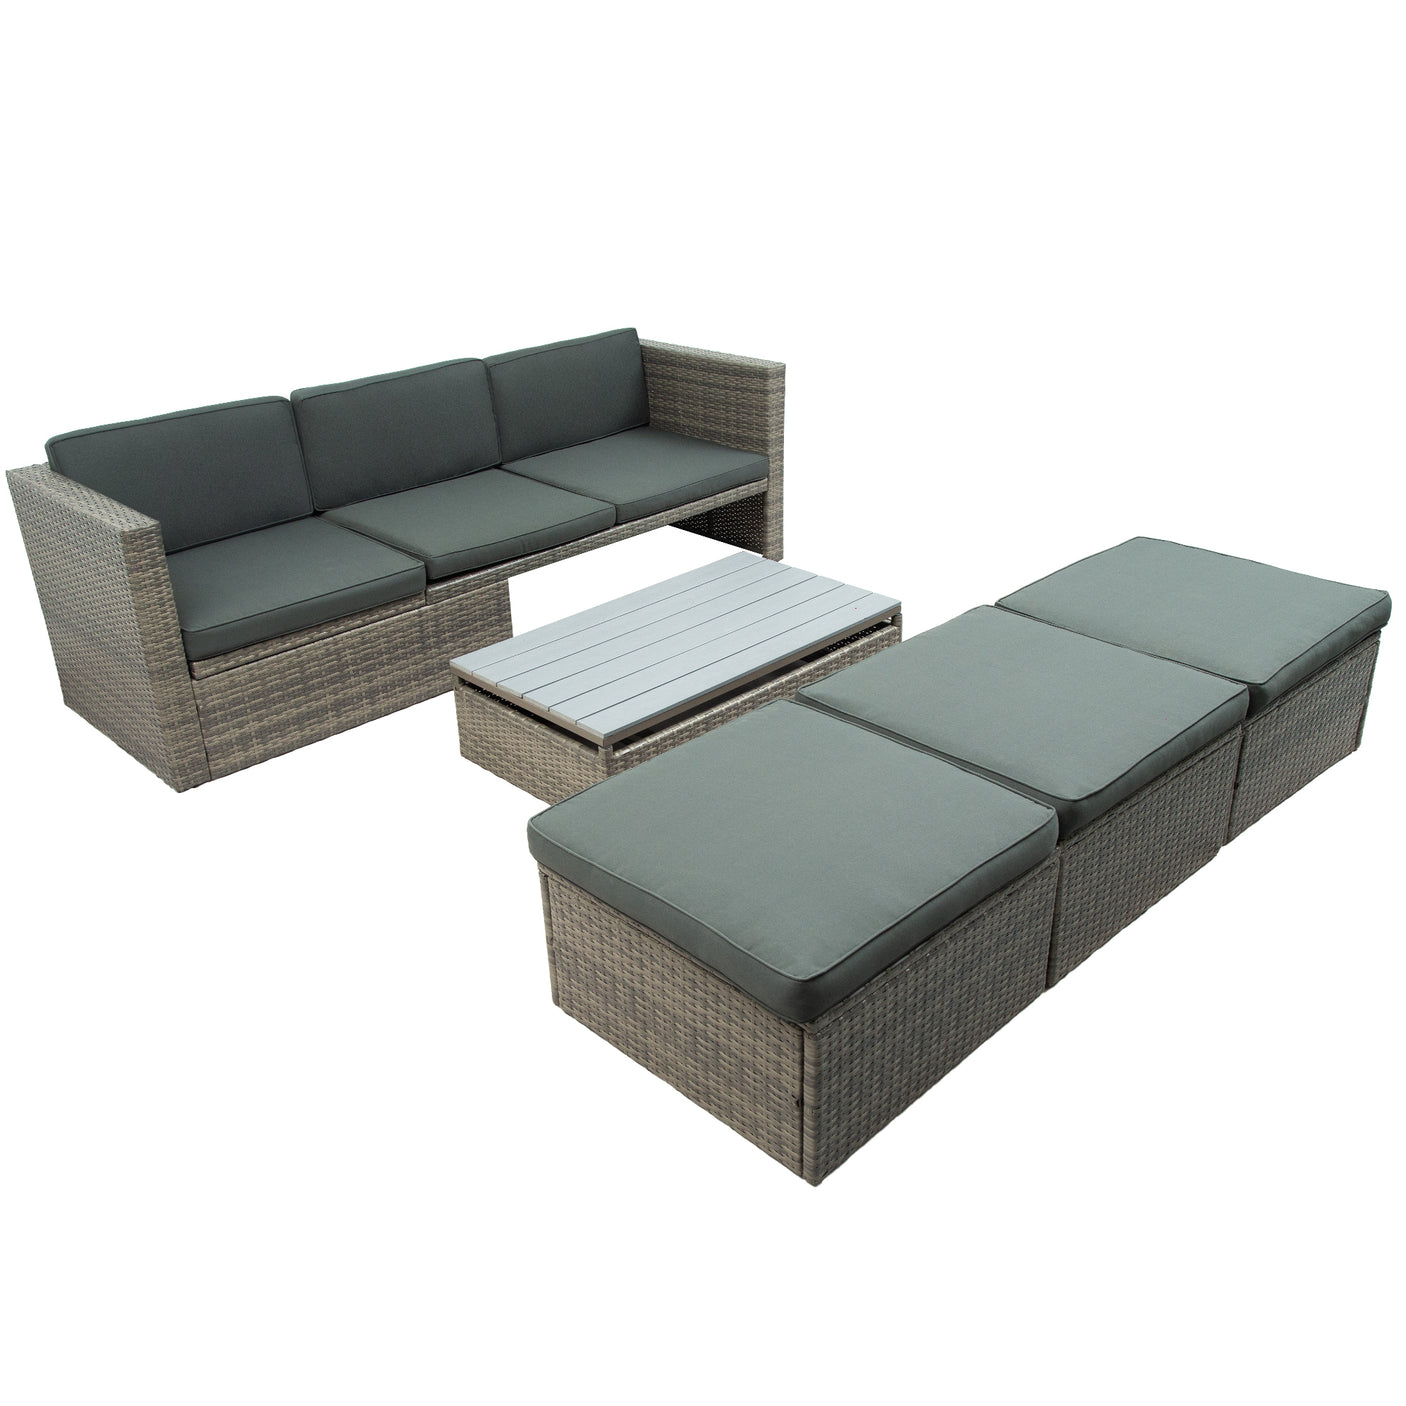 U_STYLE Patio Furniture Sets, 5-Piece Patio Wicker Sofa with Adustable Backrest, Cushions, Ottomans and Lift Top Coffee Table